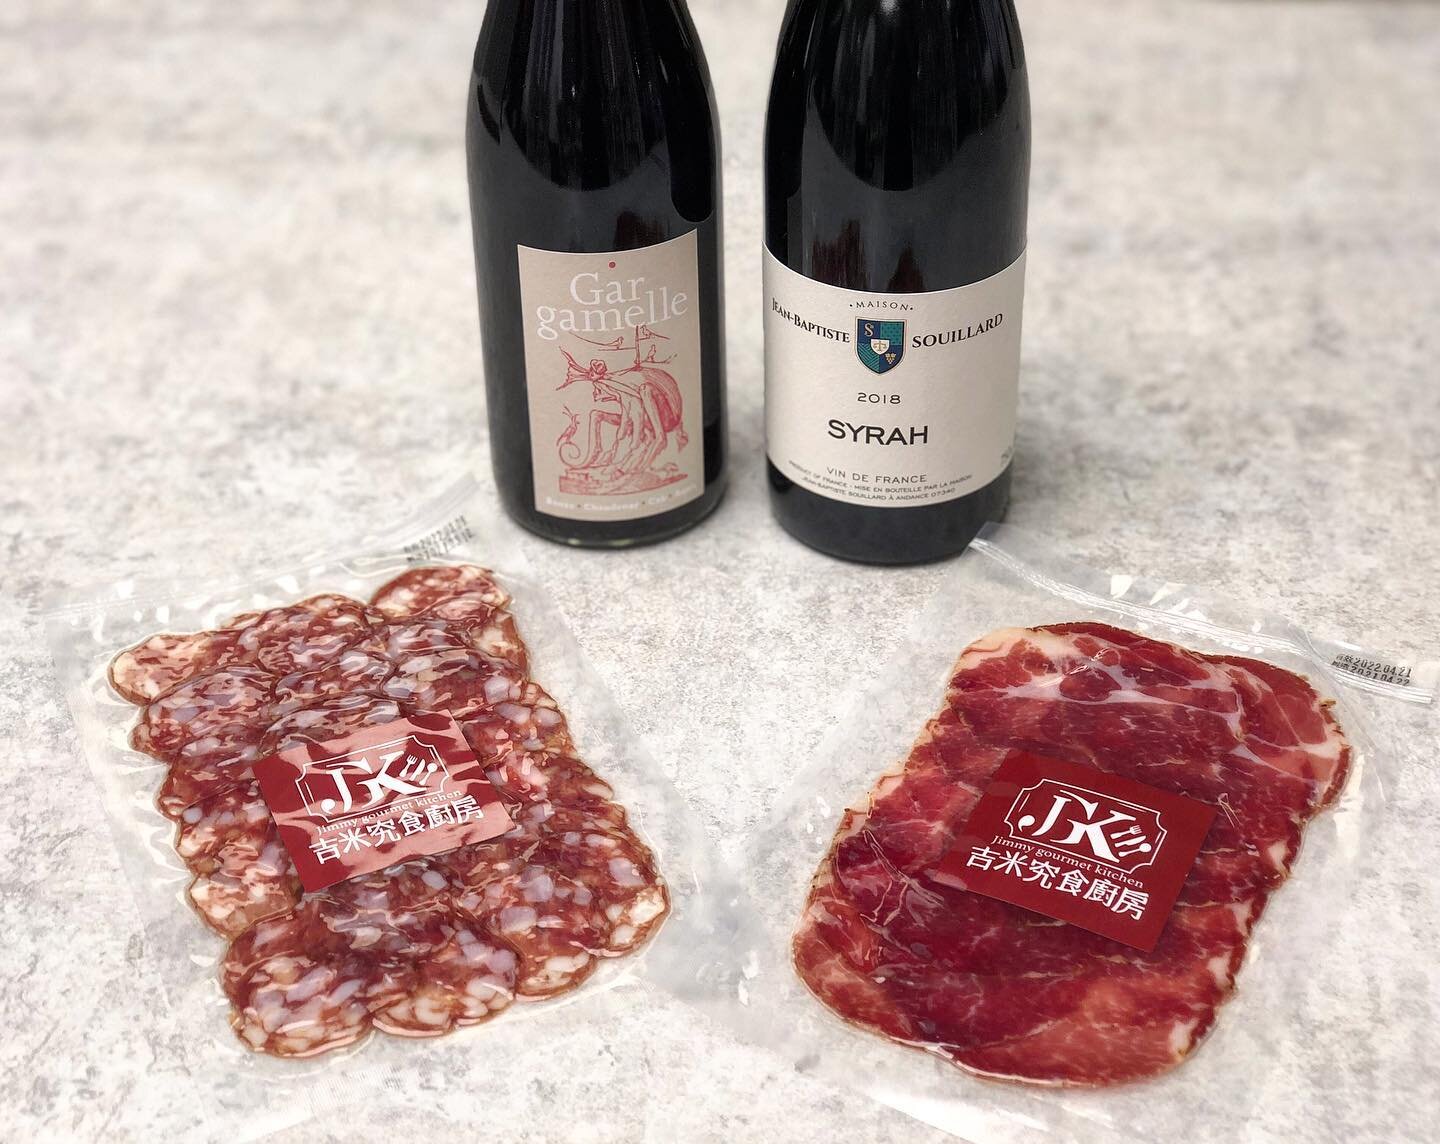 Wine &amp; Meat Package specially curated by Rootstock Selections. You will get 2 wines from us paired with 2 cold meats from Jimmy Gourmet. Drink and eat well at home during this pandemic. Domaine de Montrieux Gargamelle Rouge, a blend of Gamay, Cab